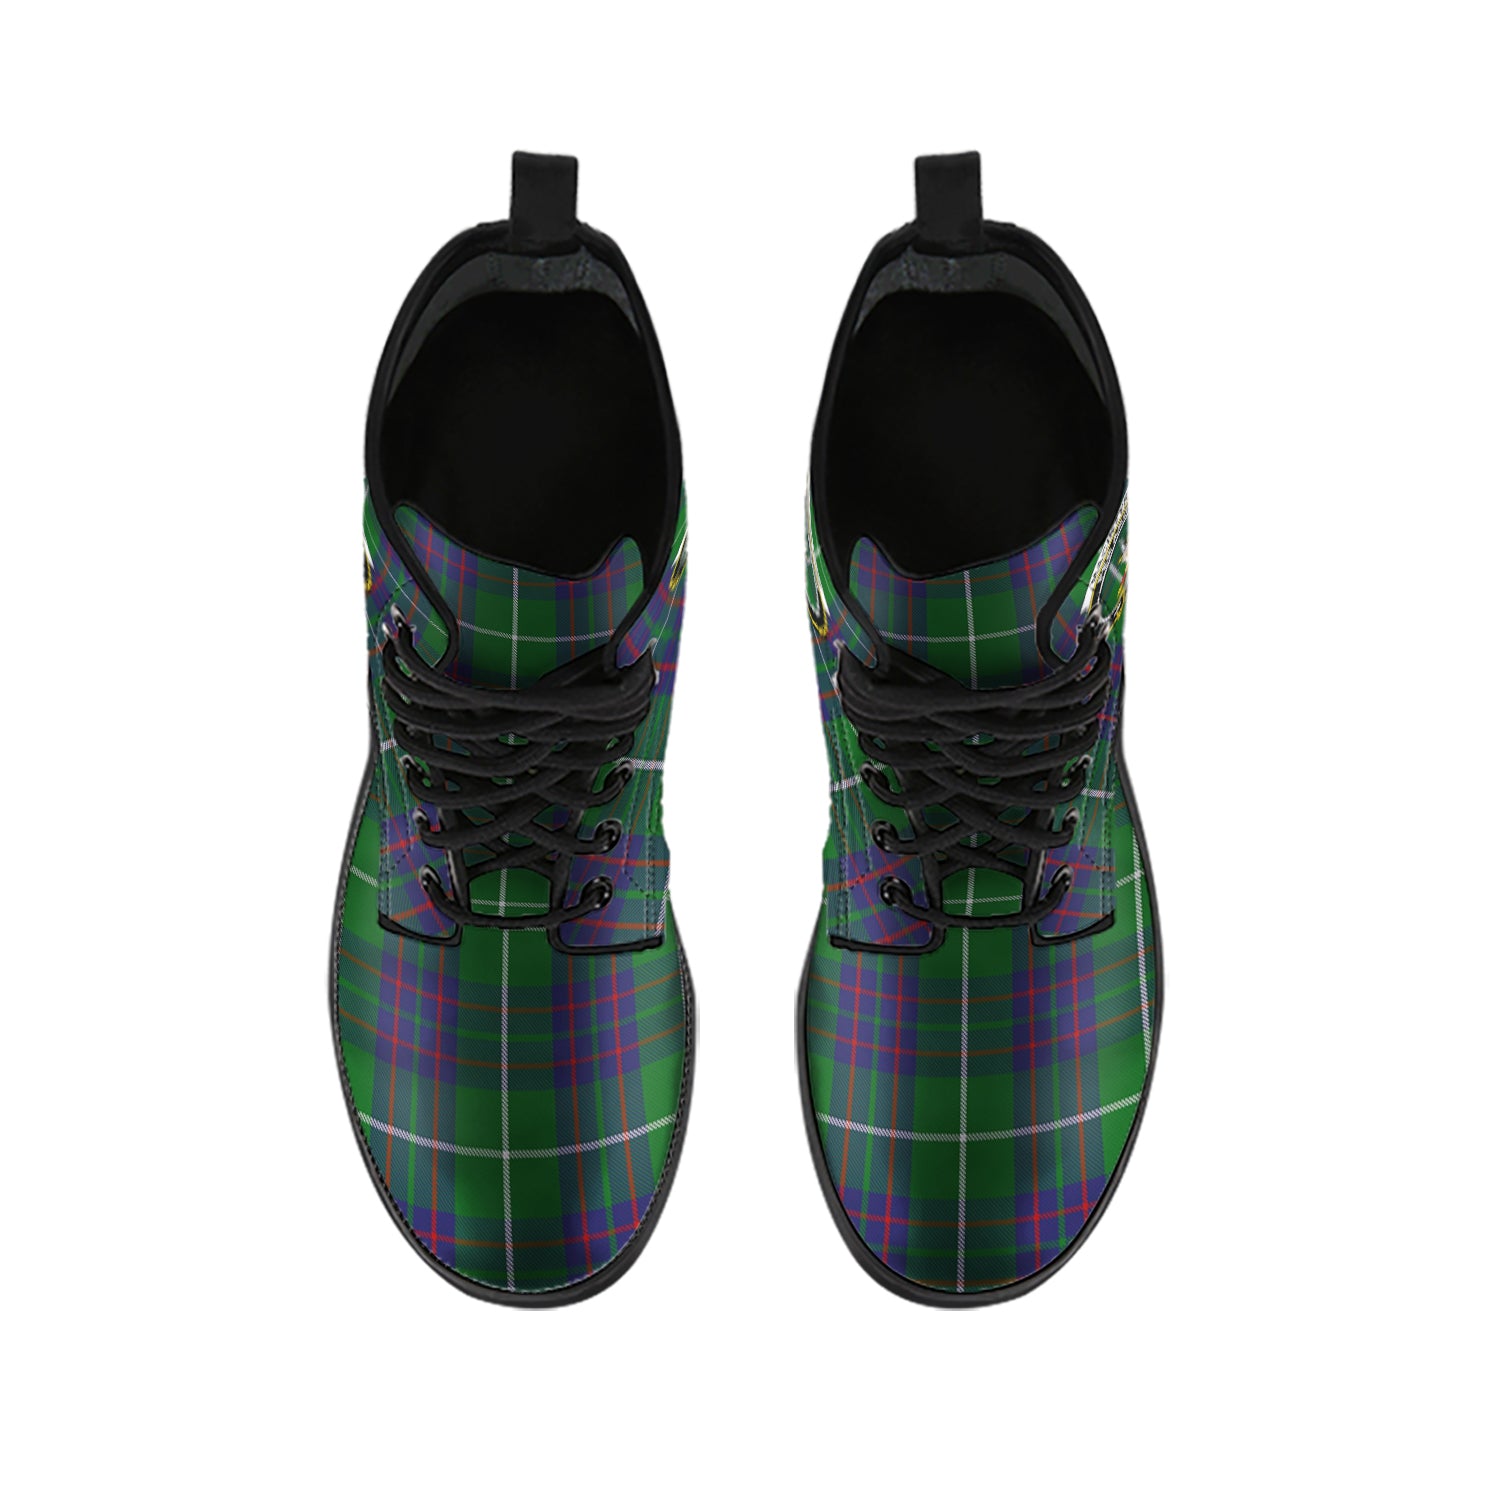 macintyre-hunting-tartan-leather-boots-with-family-crest